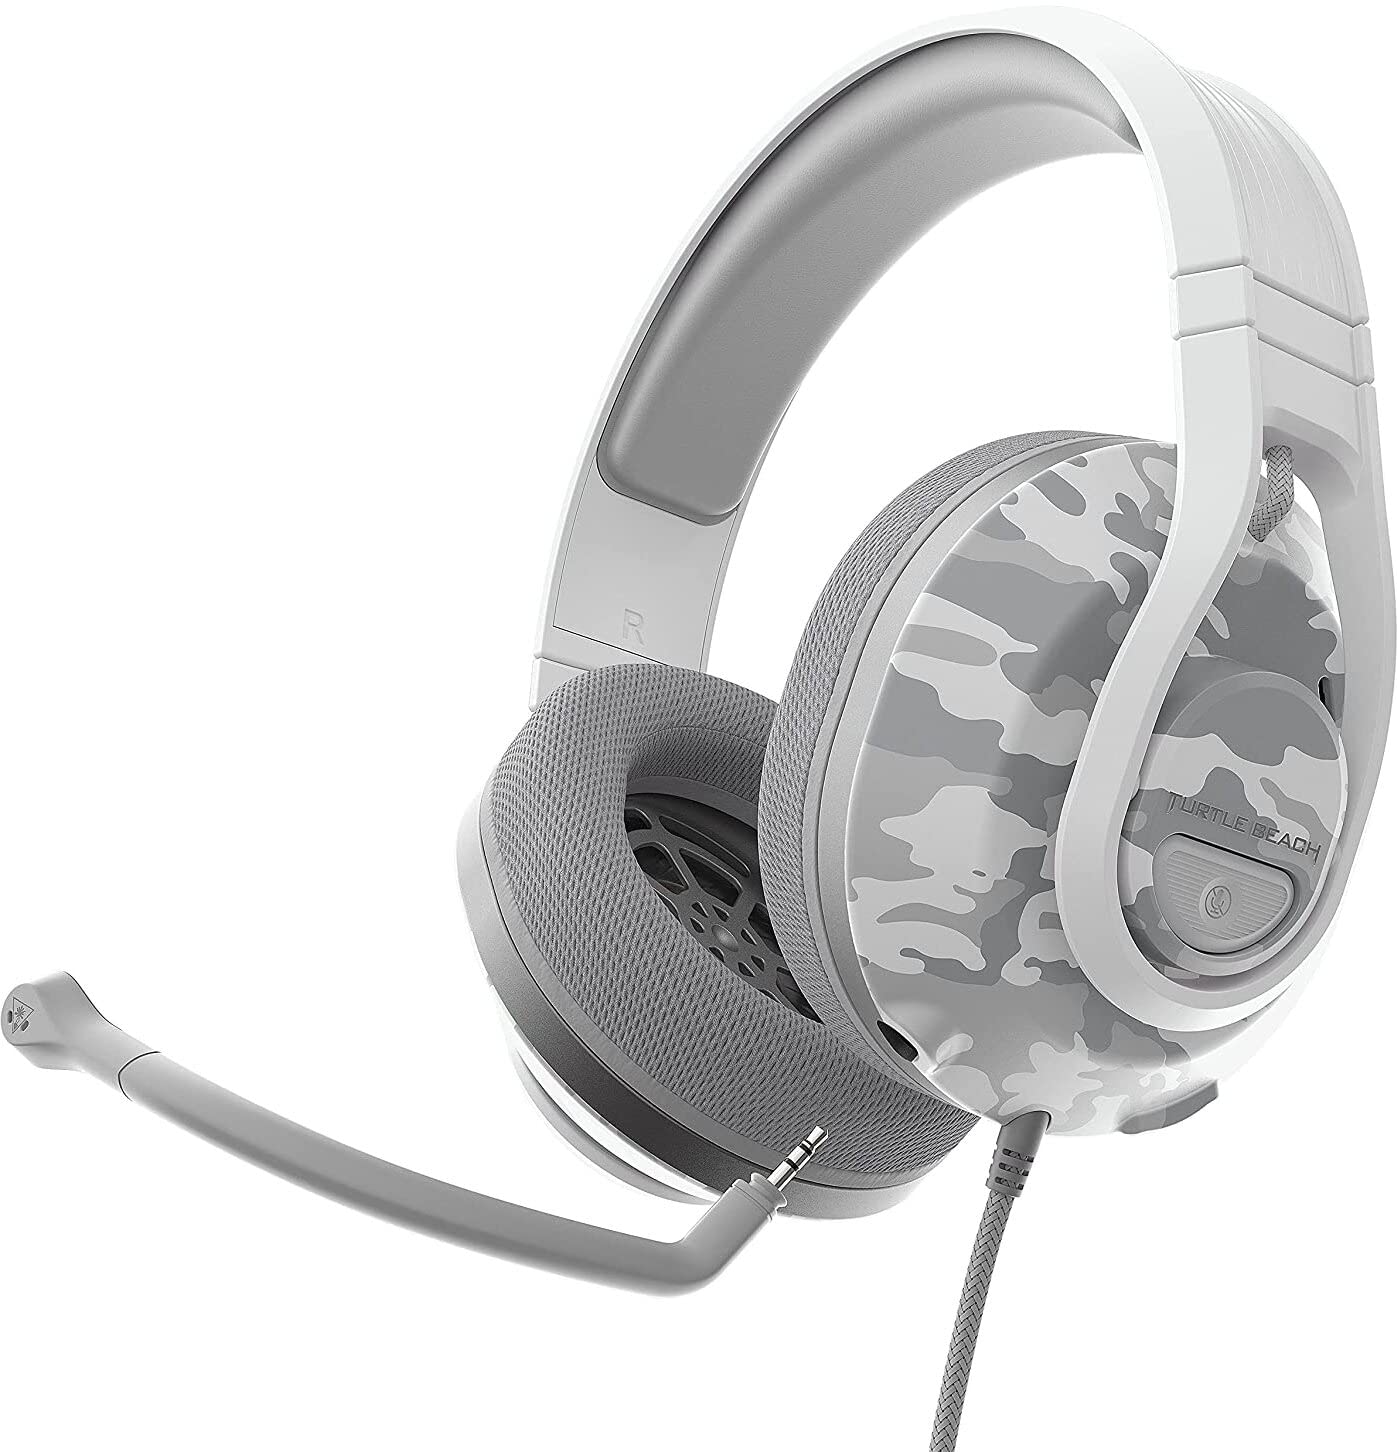 Turtle Beach Recon 500 Multiplatform Gaming Headset with 3.5mm - Arctic White (Certified Refurbished)